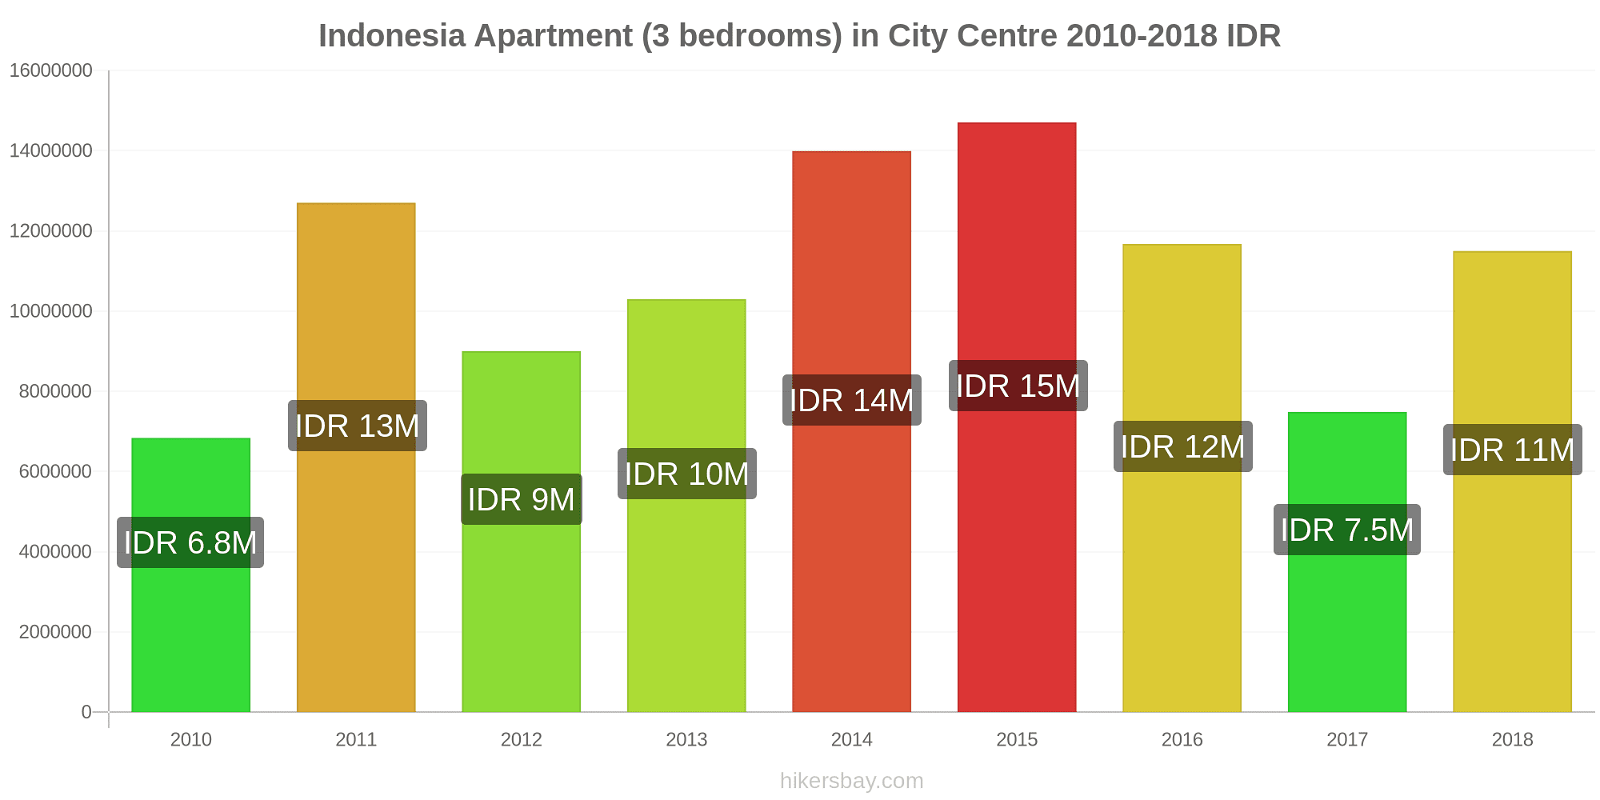 Indonesia price changes Apartment (3 bedrooms) in City Centre hikersbay.com